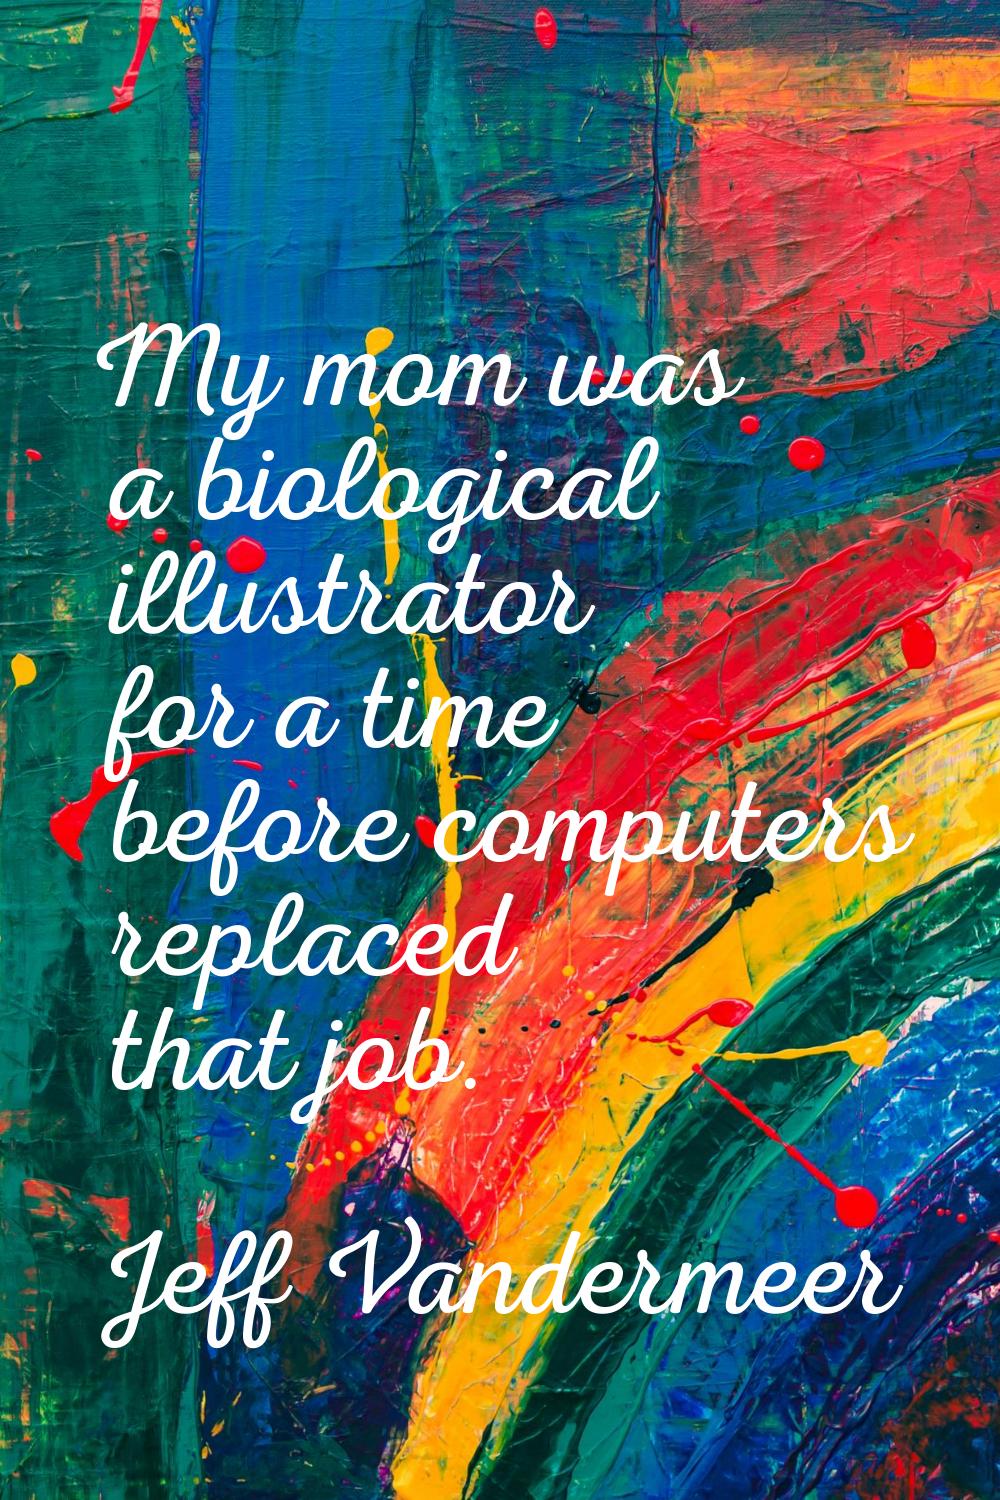 My mom was a biological illustrator for a time before computers replaced that job.